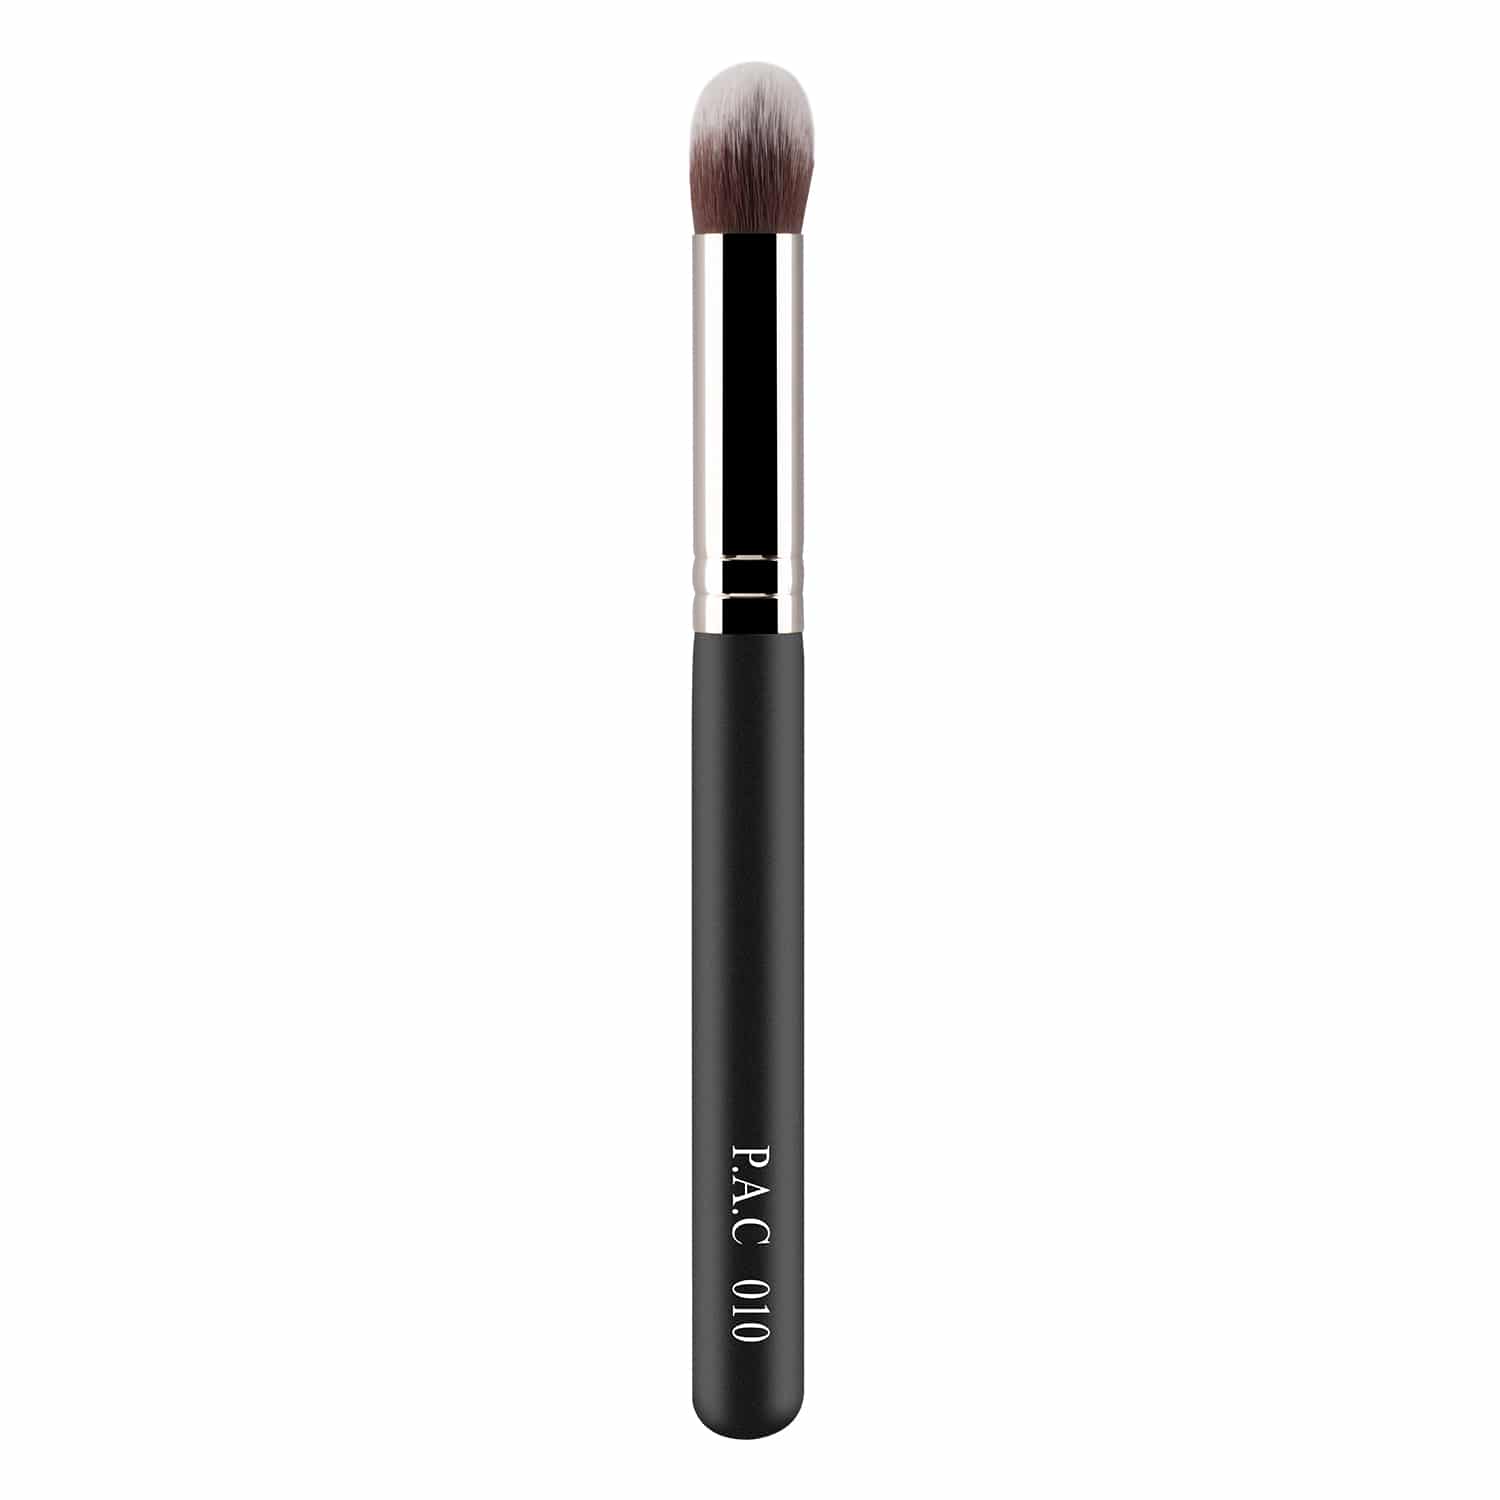 PAC Concealer Brush 010 PAC